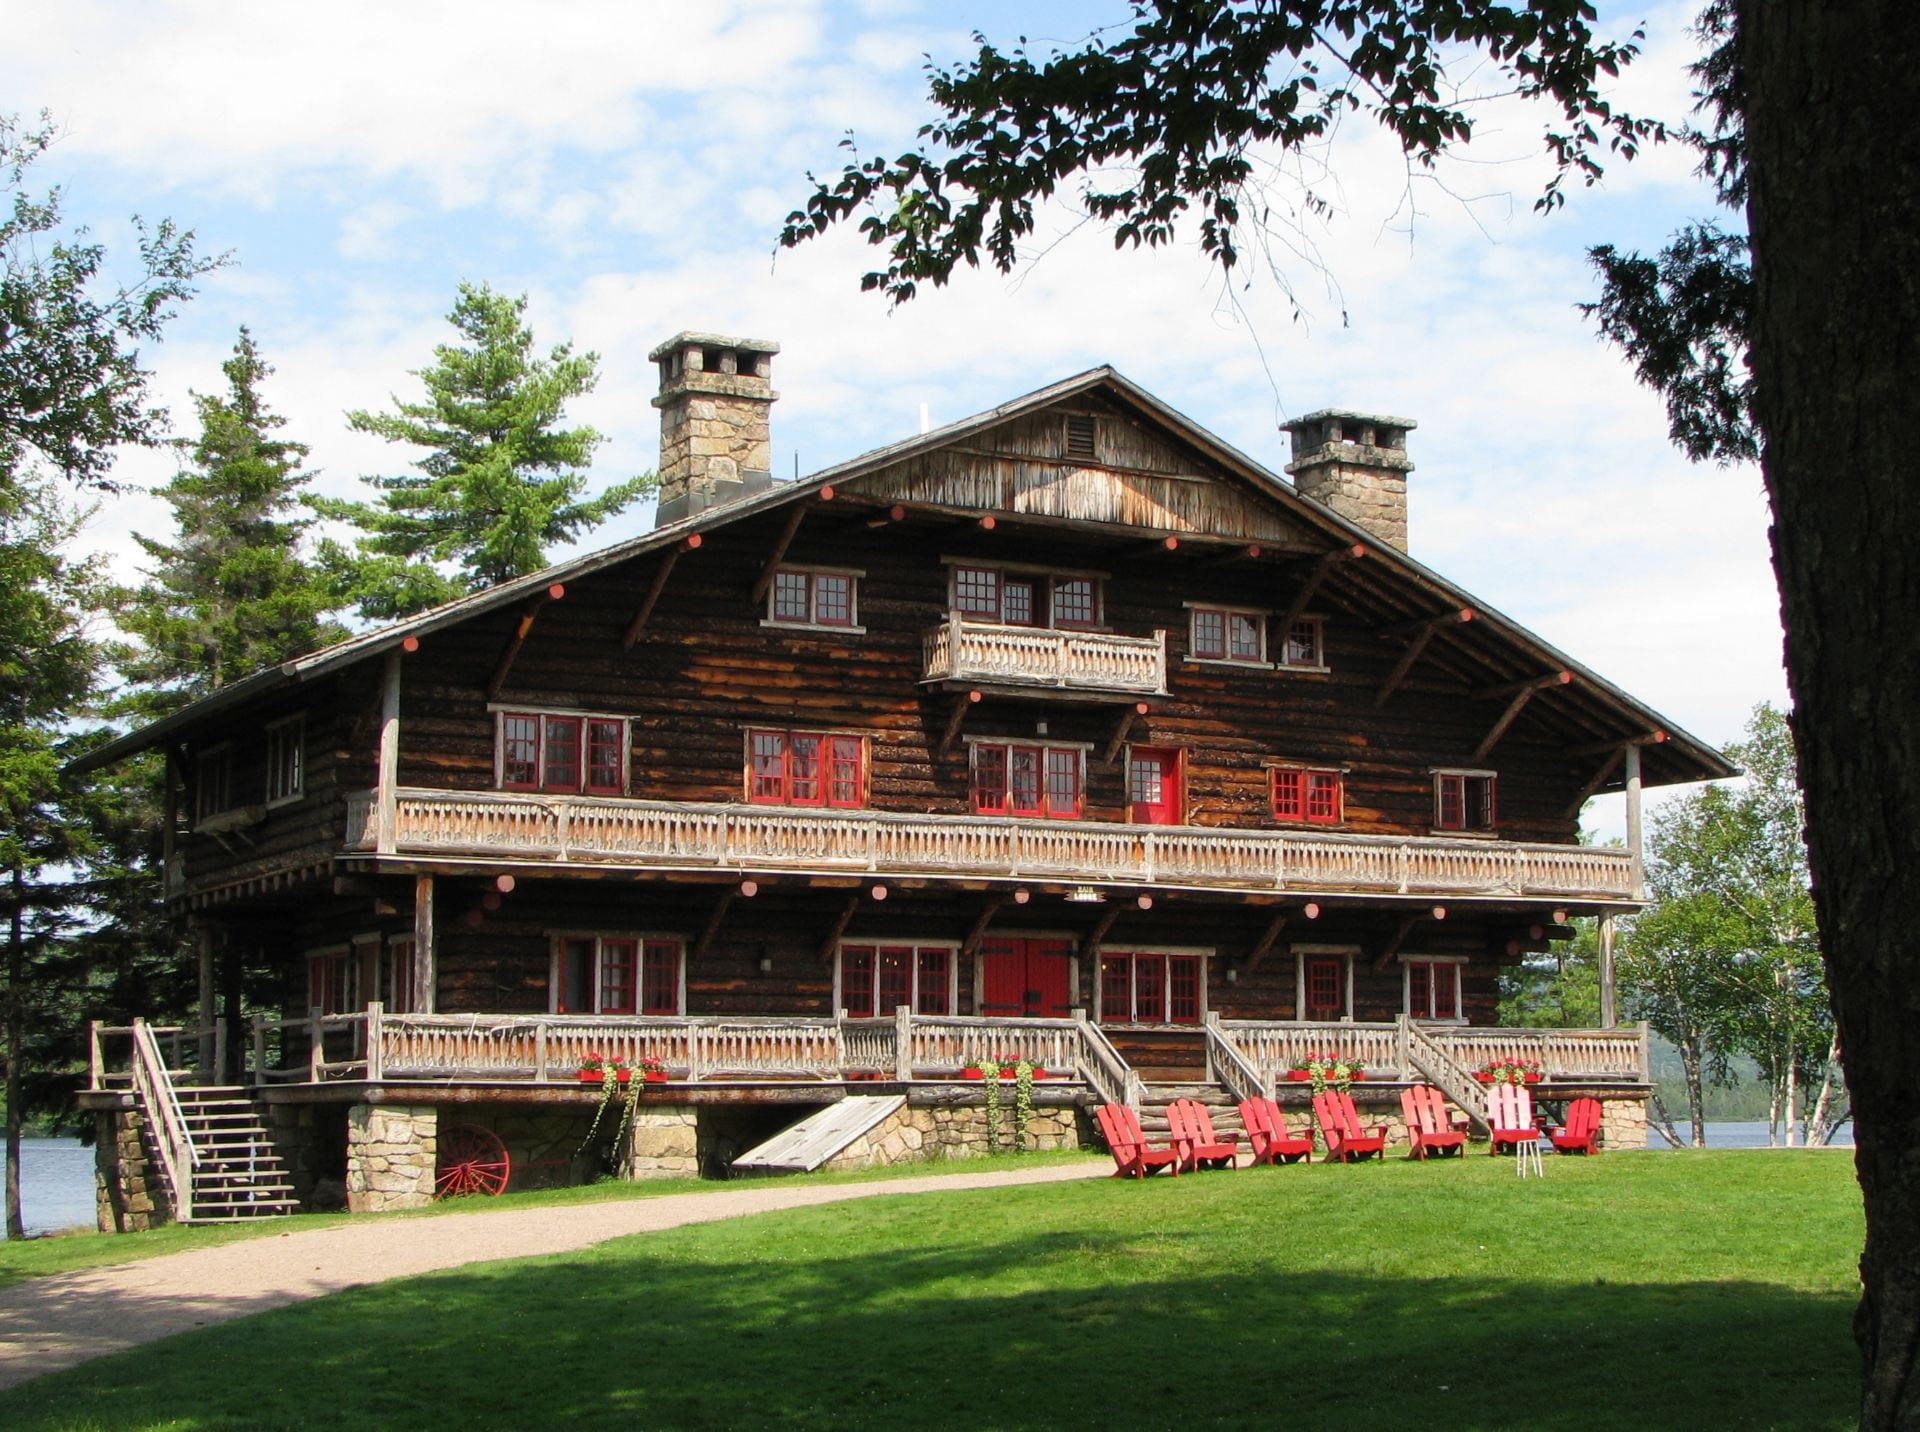 Fig. 1. Façade of building in combination of log cabin architecture with Swiss chalet influences. 